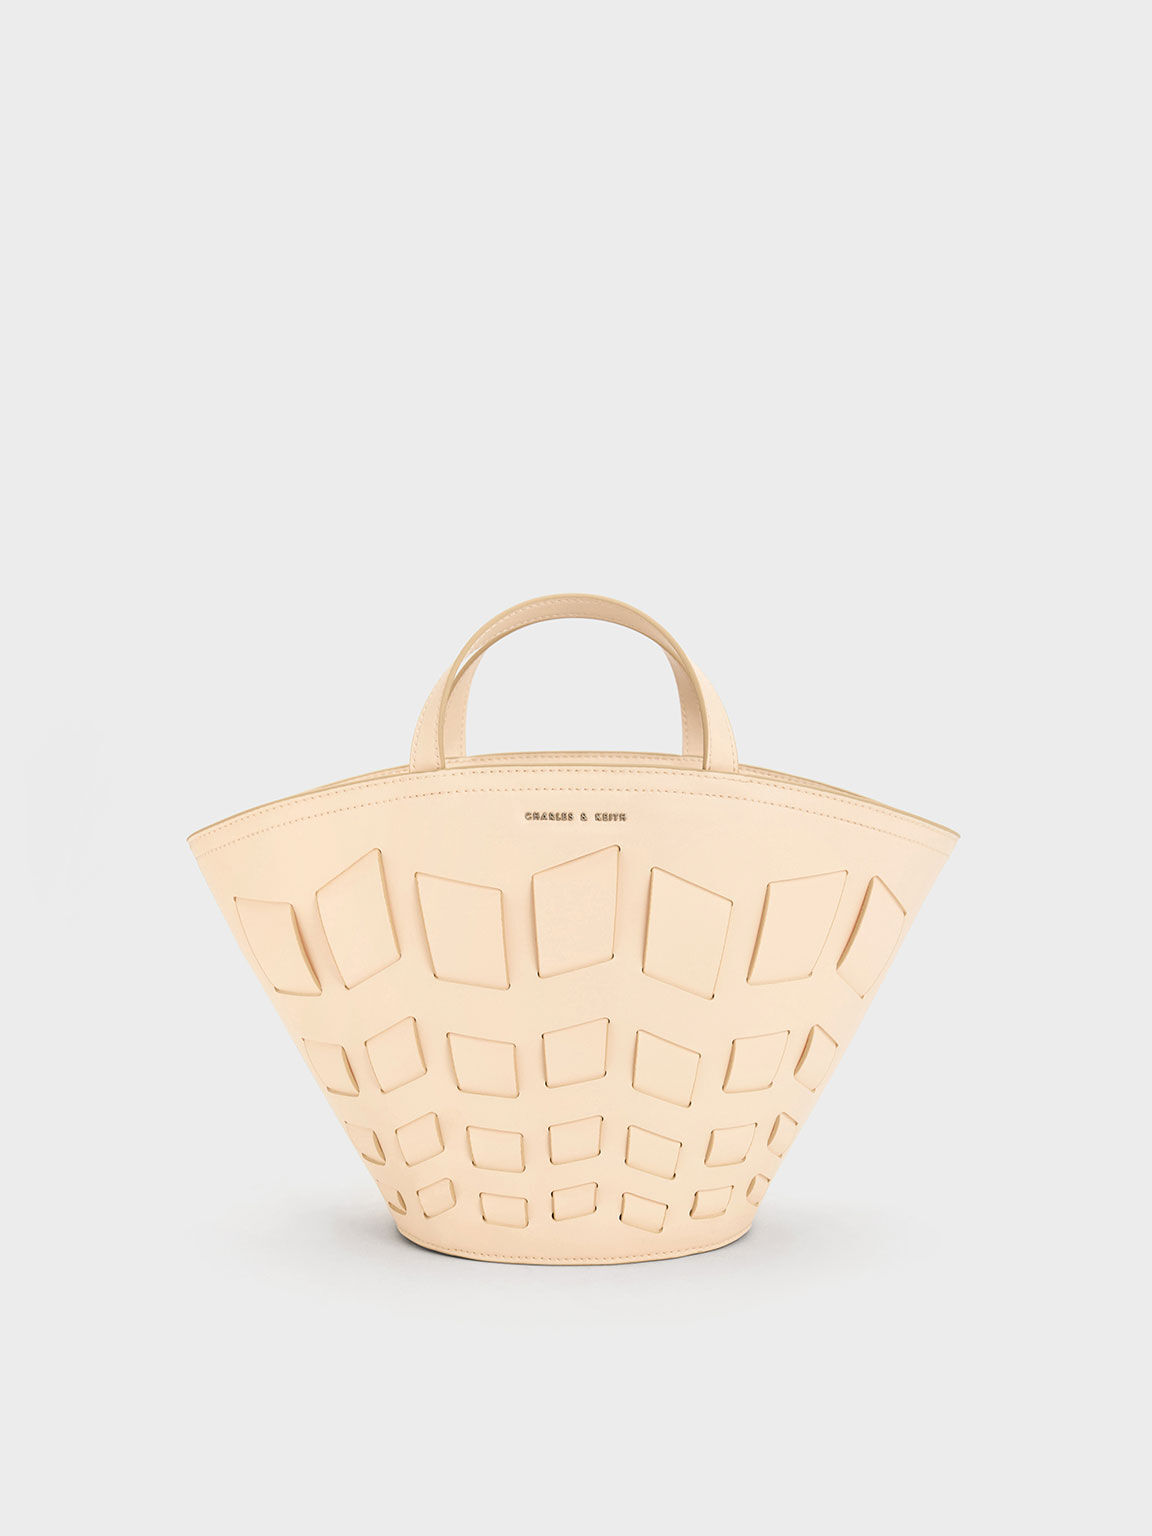 Charles & Keith Women's Panelled Tote Bag